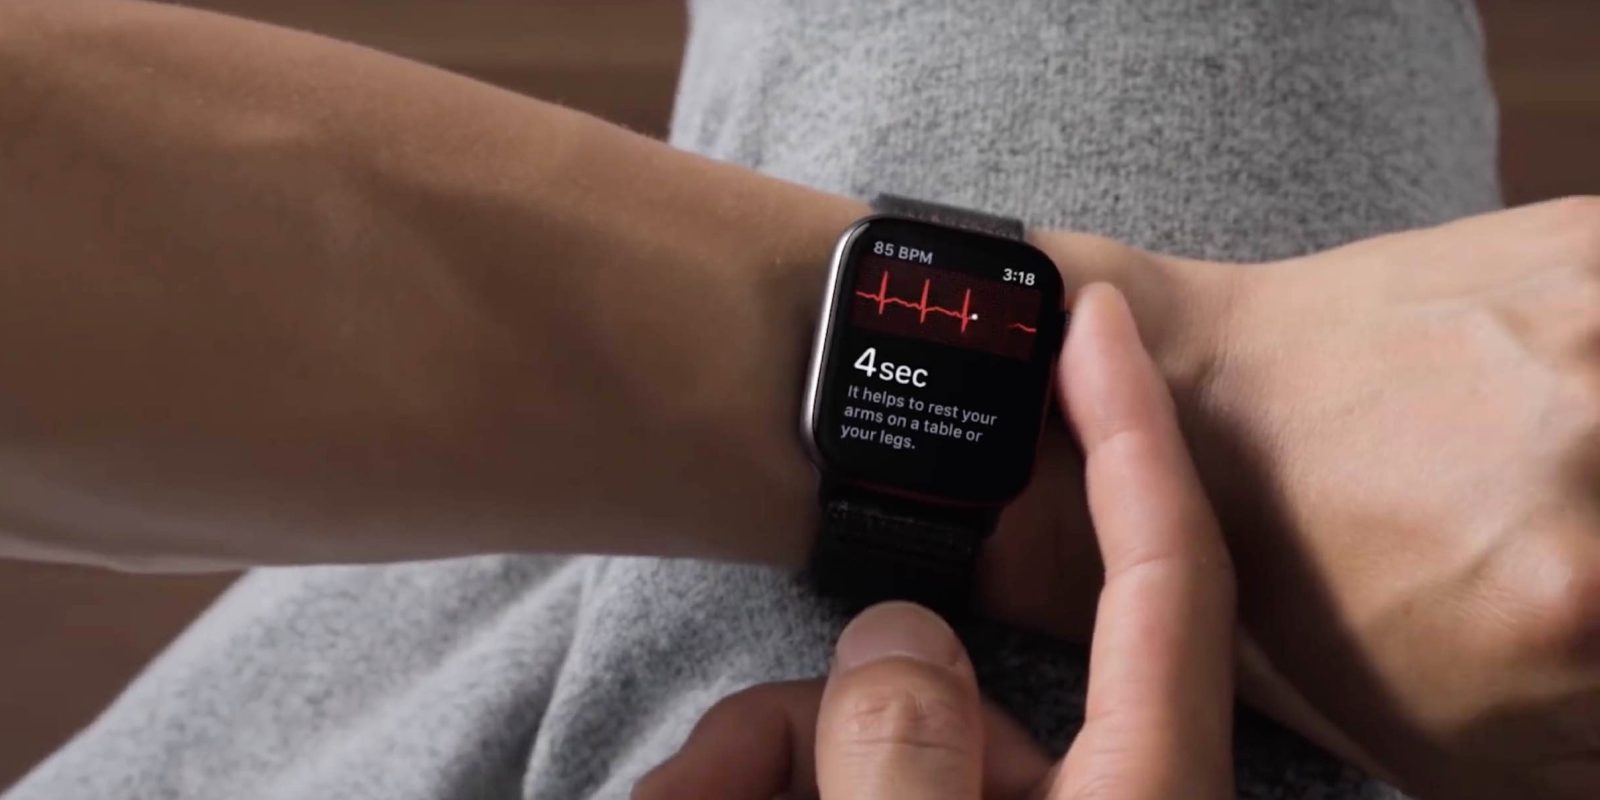 How to take an ECG test on Apple Watch Series 4